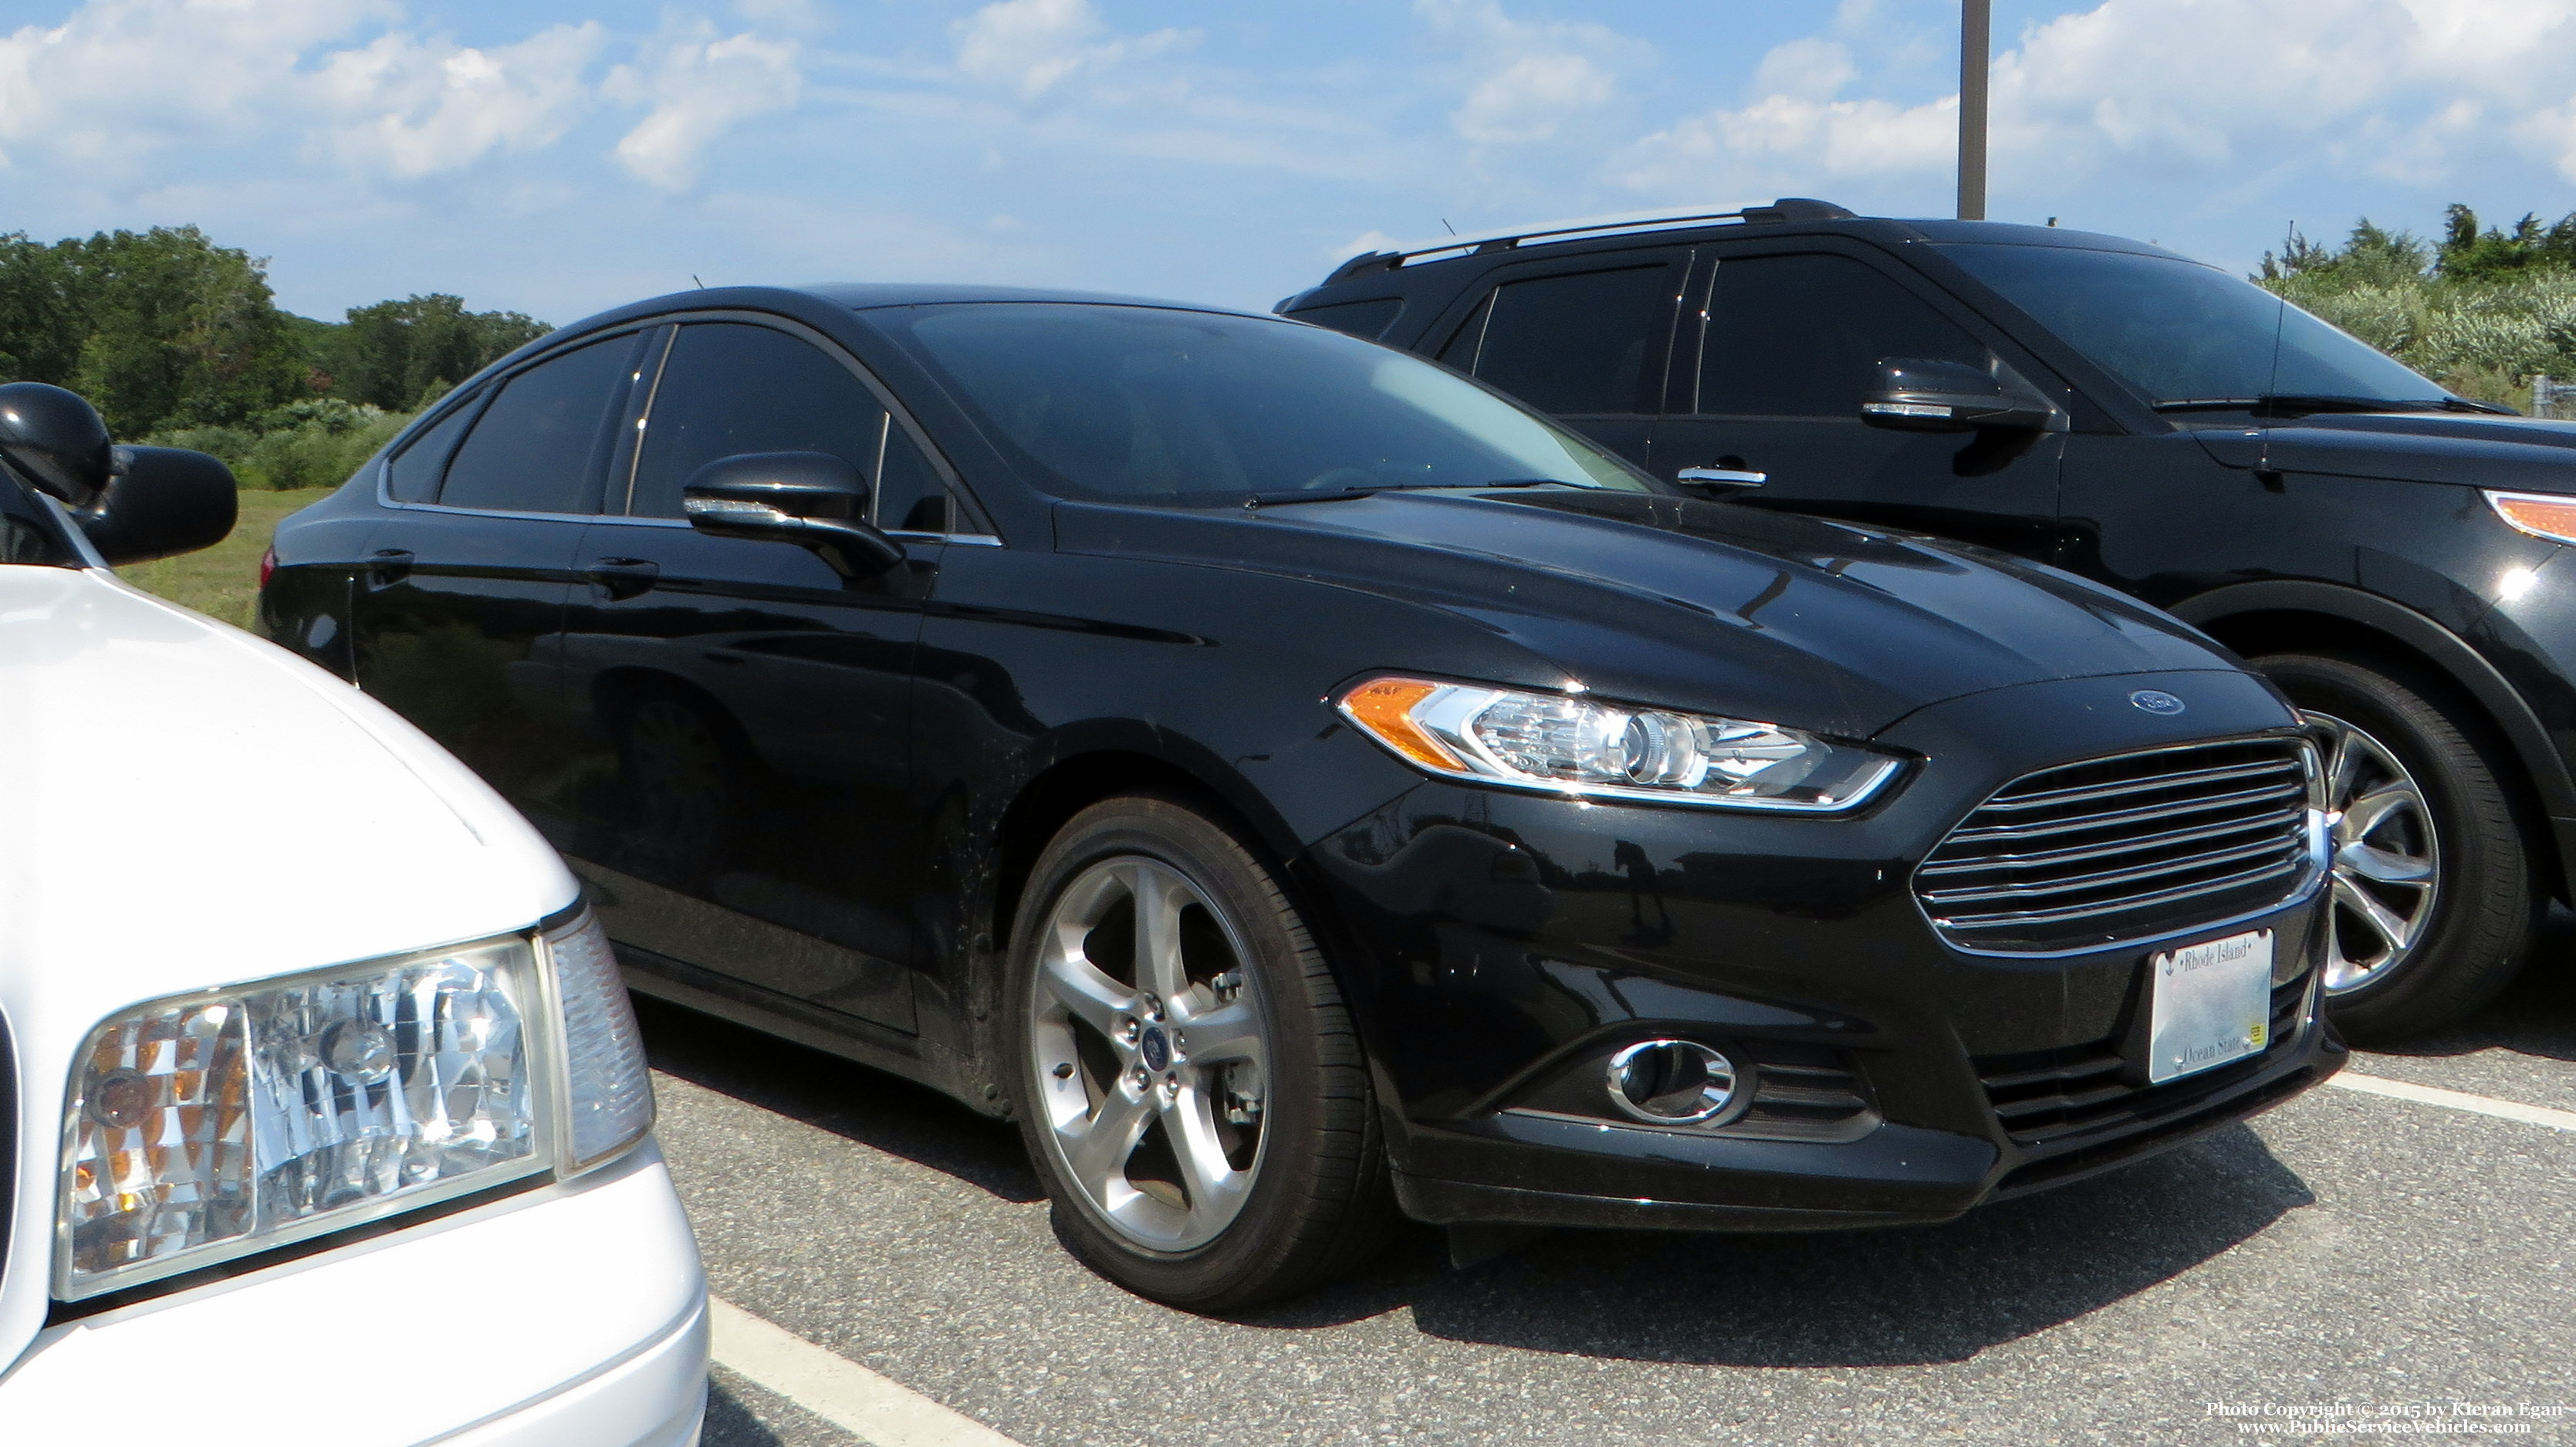 A photo  of Charlestown Police
            Unmarked Unit, a 2013-2015 Ford Fusion             taken by Kieran Egan